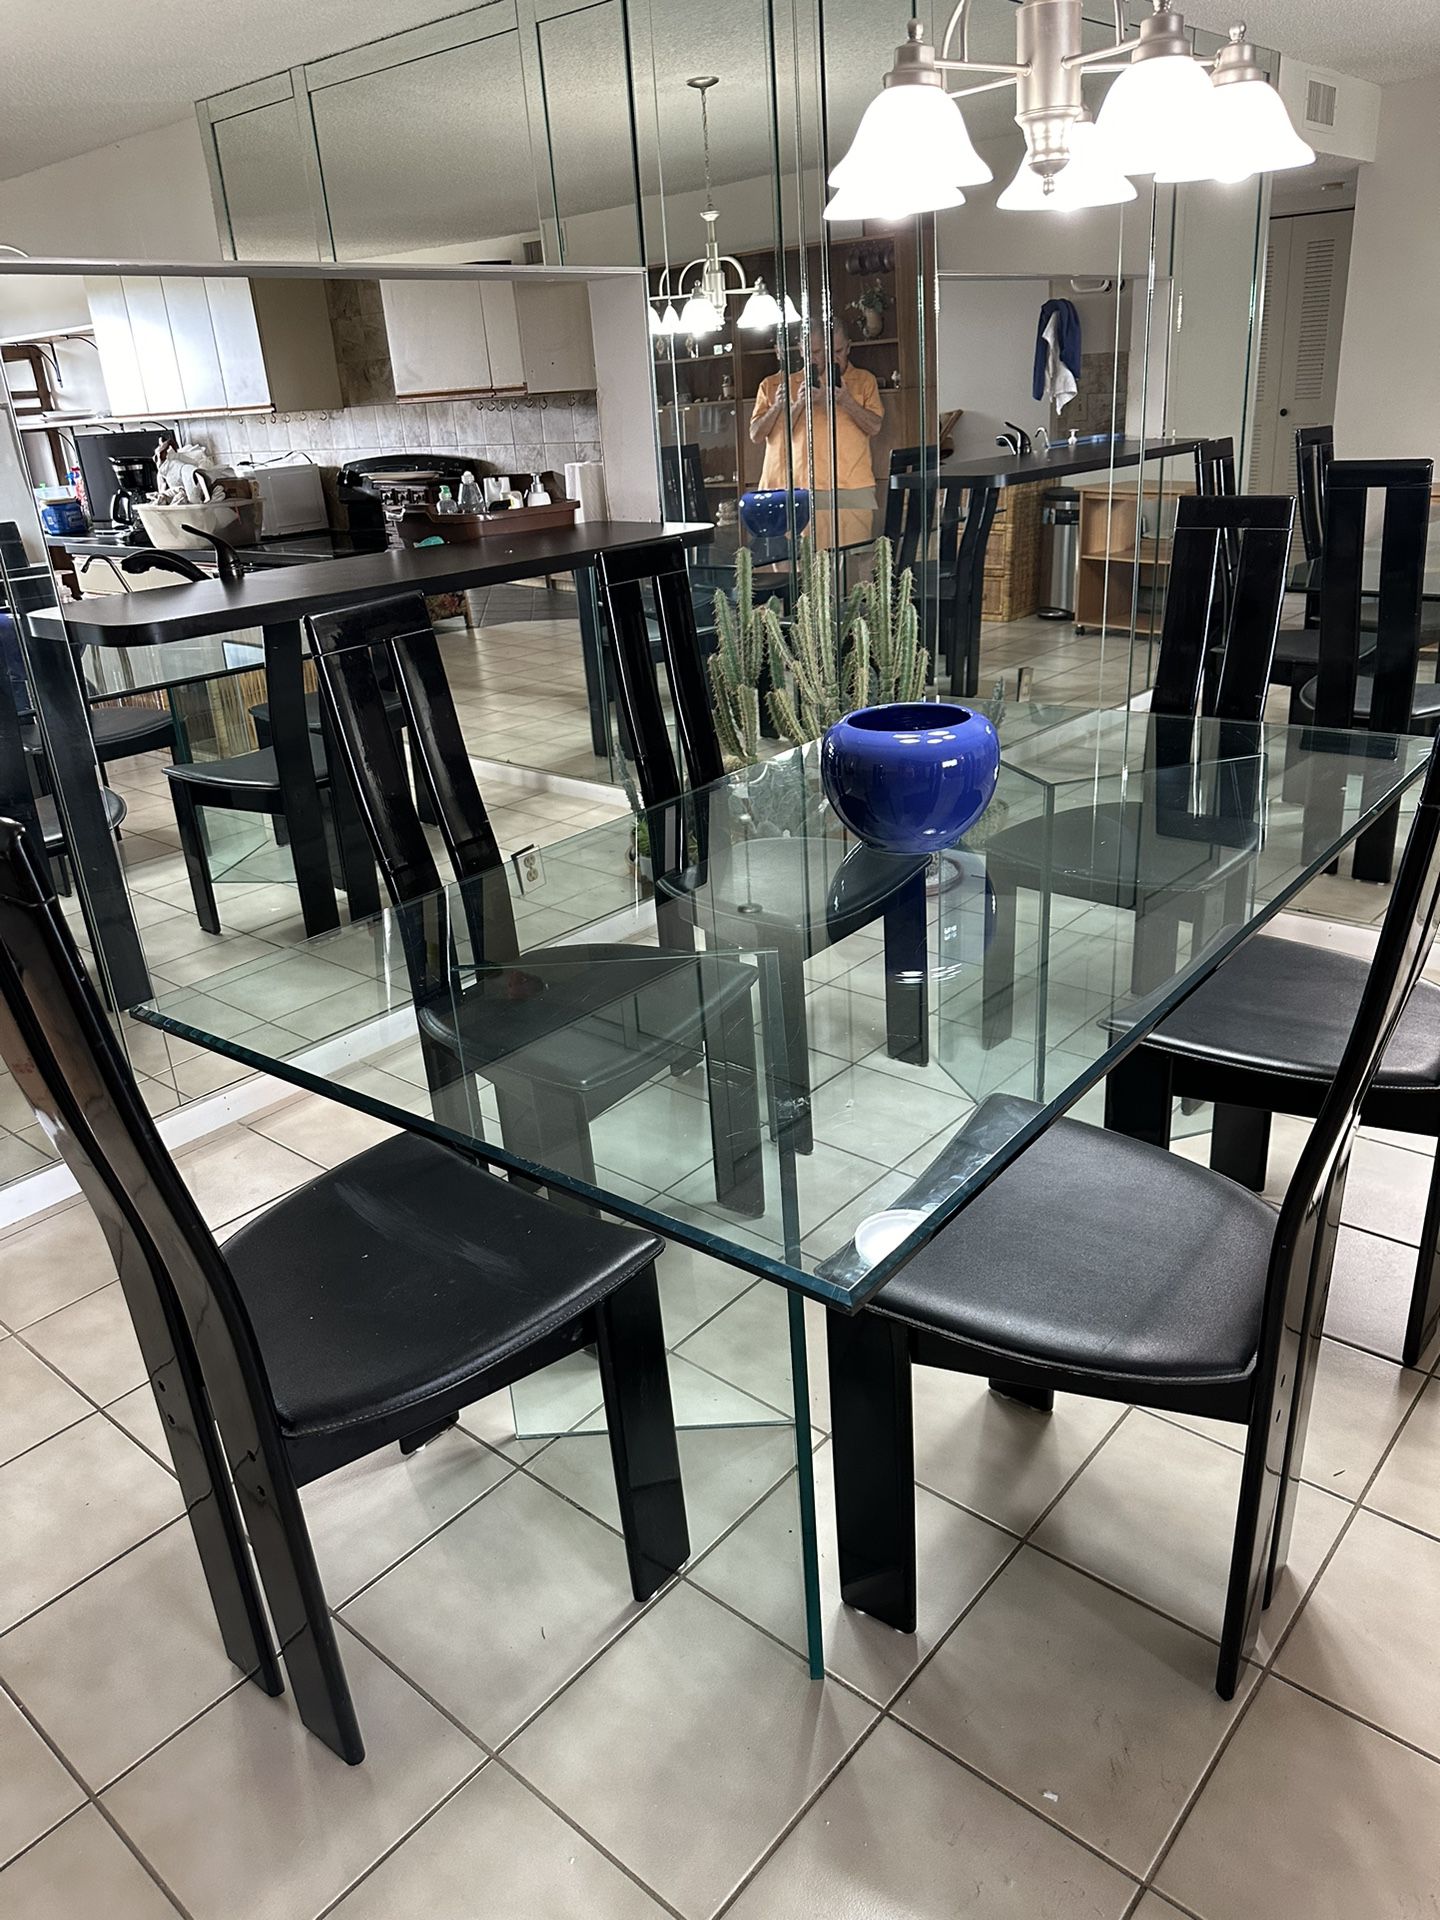 Dining Room Table and Chairs 